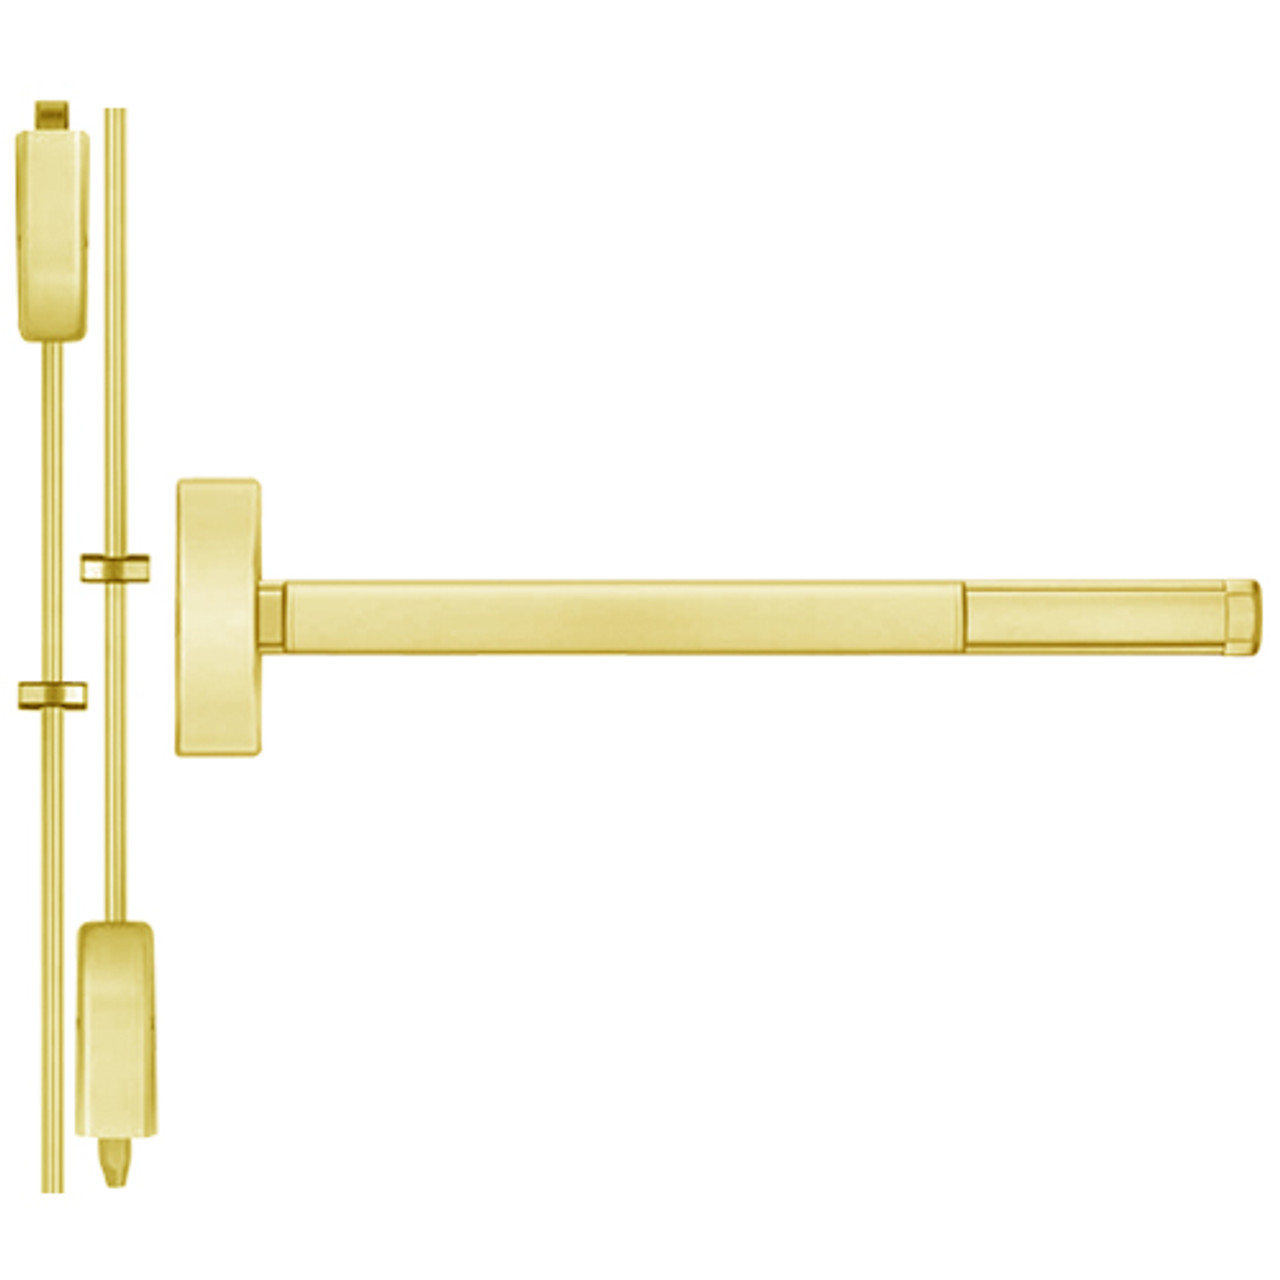 ELR2215LBR-605-48 PHI 2200 Series Non Fire Rated Apex Surface Vertical Rod Device with Electric Latch Retraction Prepped for Thumb Piece Always Active in Bright Brass Finish